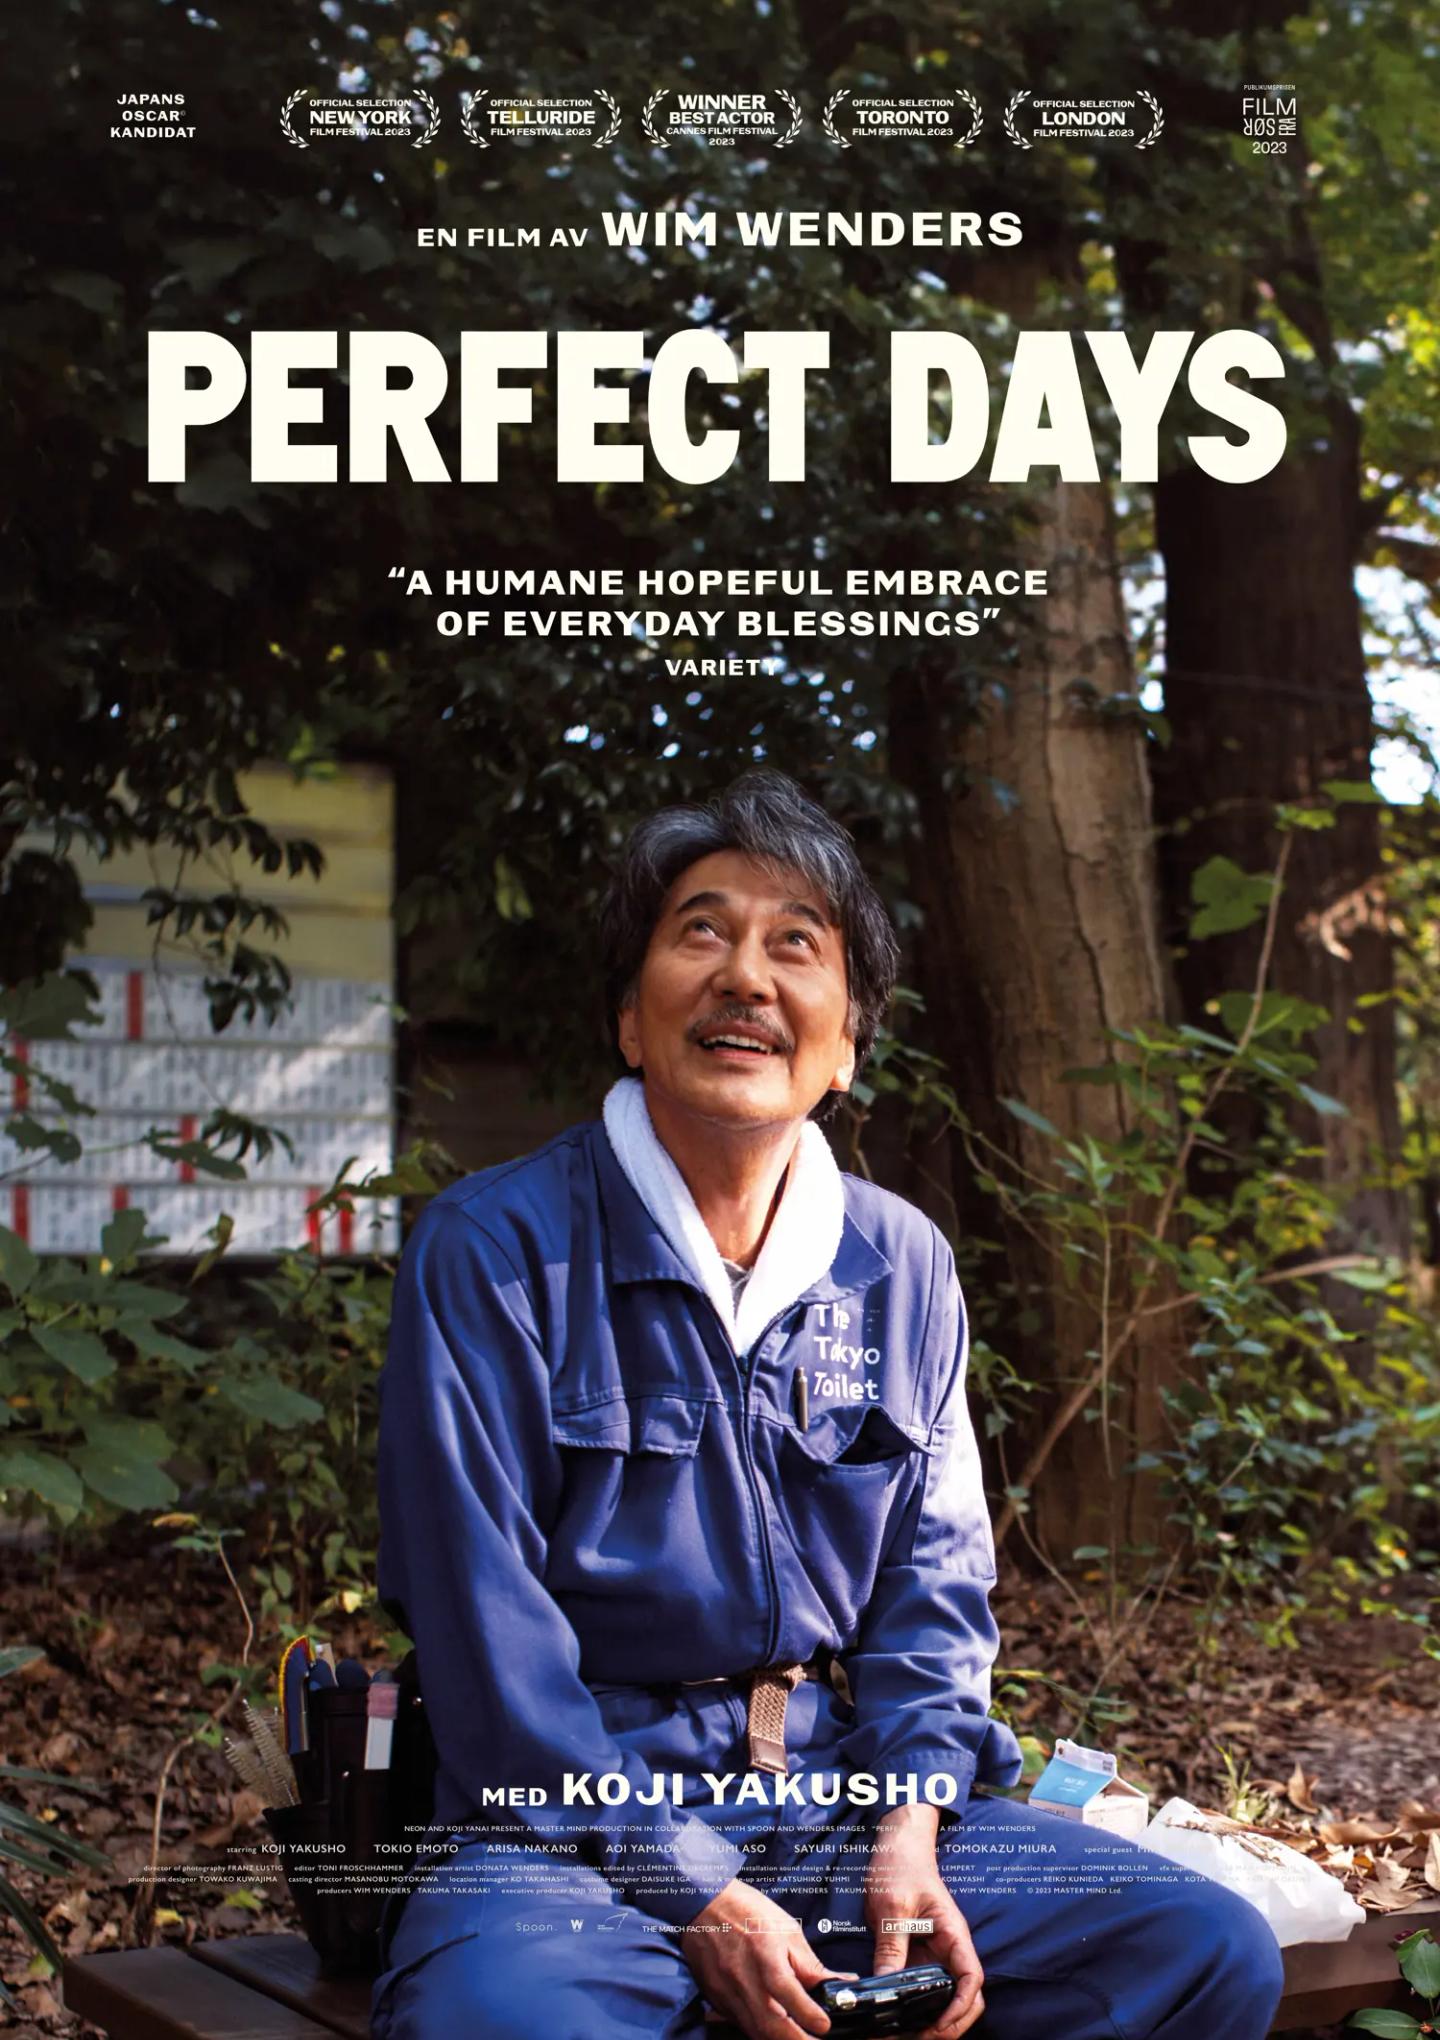 Plakat for 'Perfect Days'